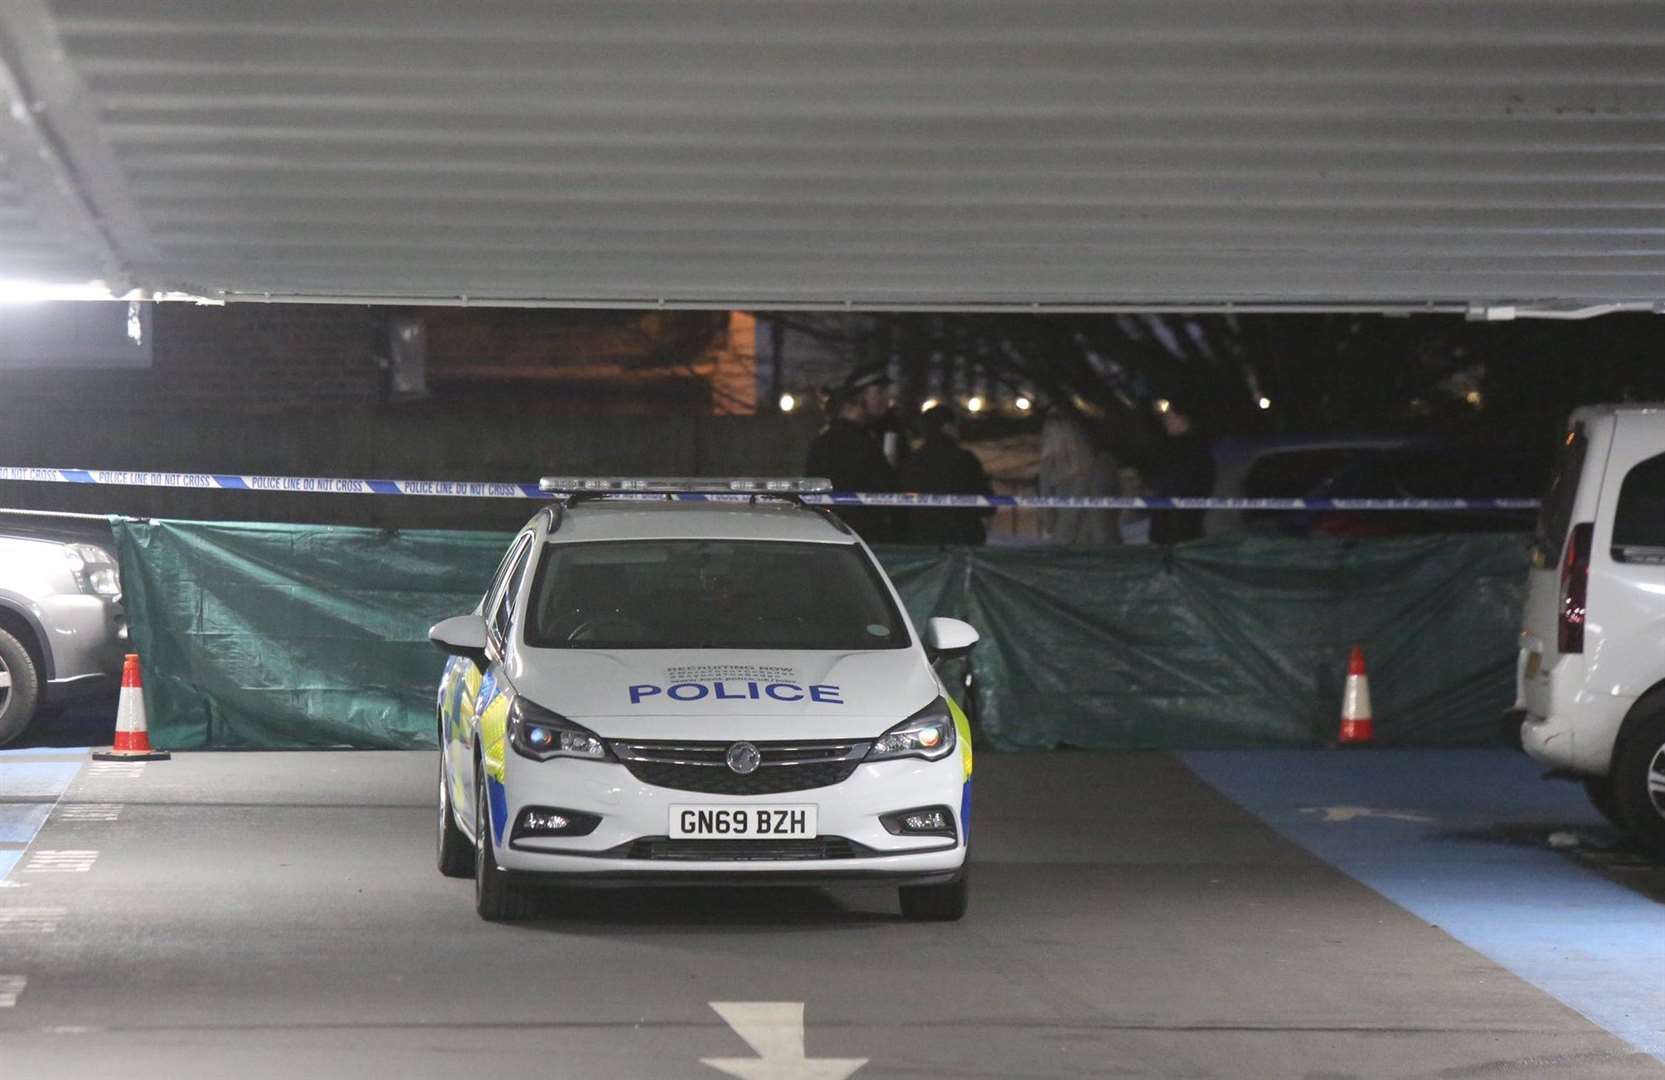 Police have cordoned off the car park. Picture: UKnip